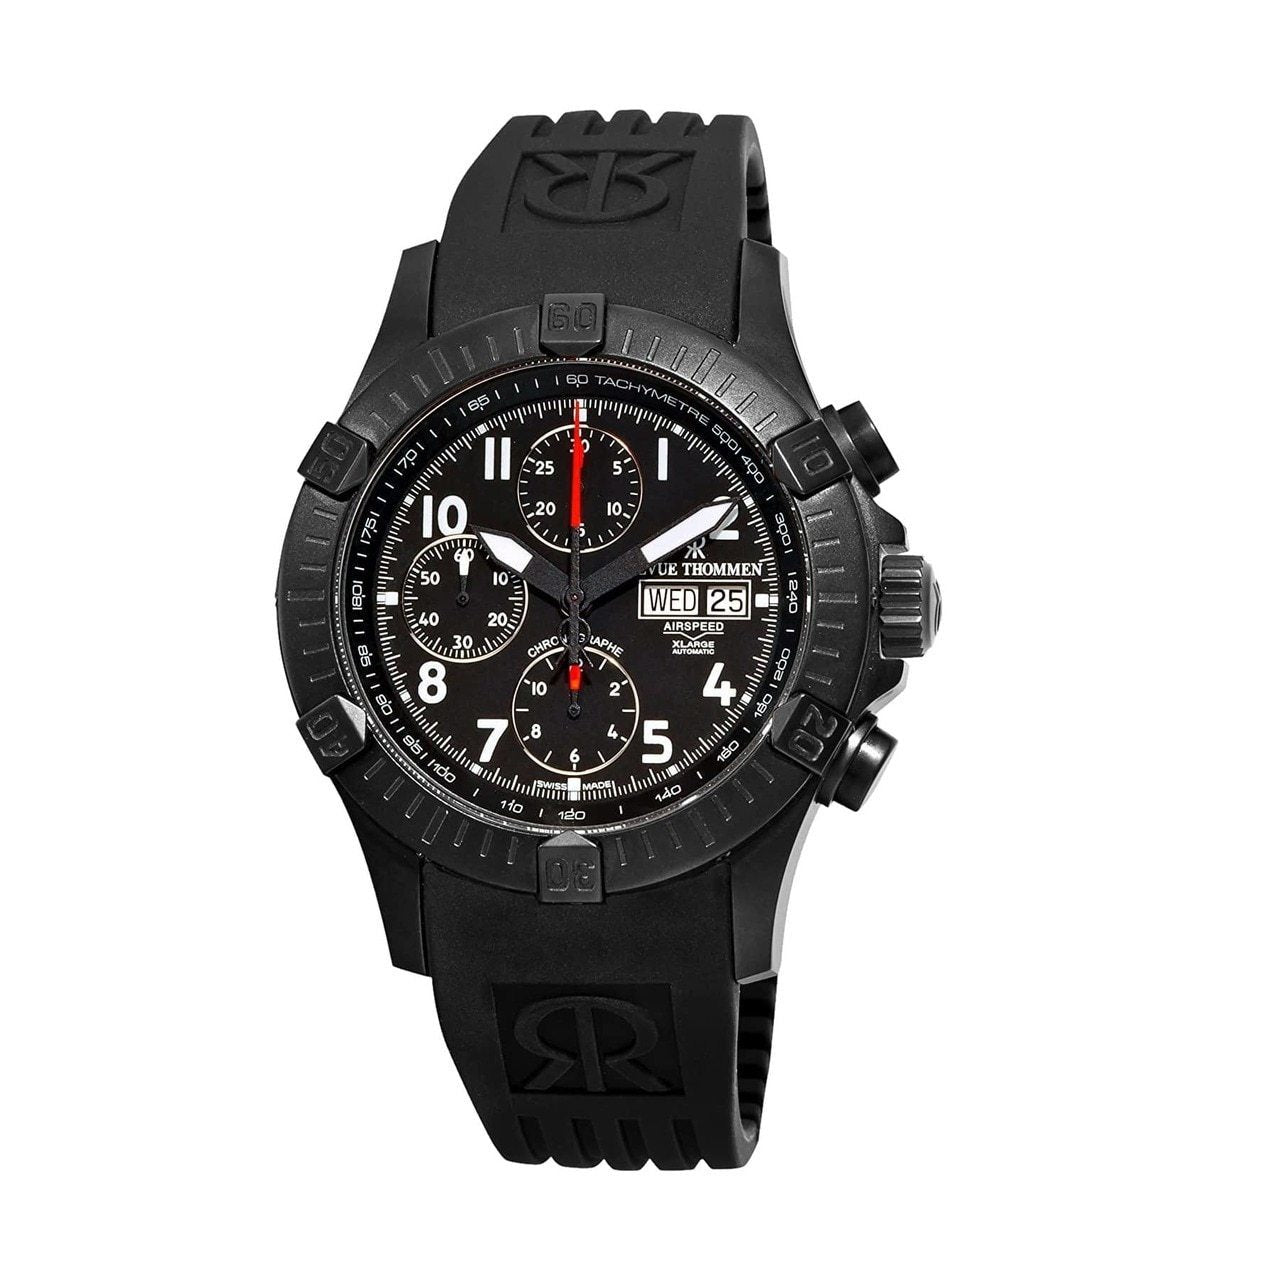 A Revue Thommen 16071.6874 Air Speed XLarge Pioneer Black Rubber Men's Chronograph Automatic Watch on a white background.